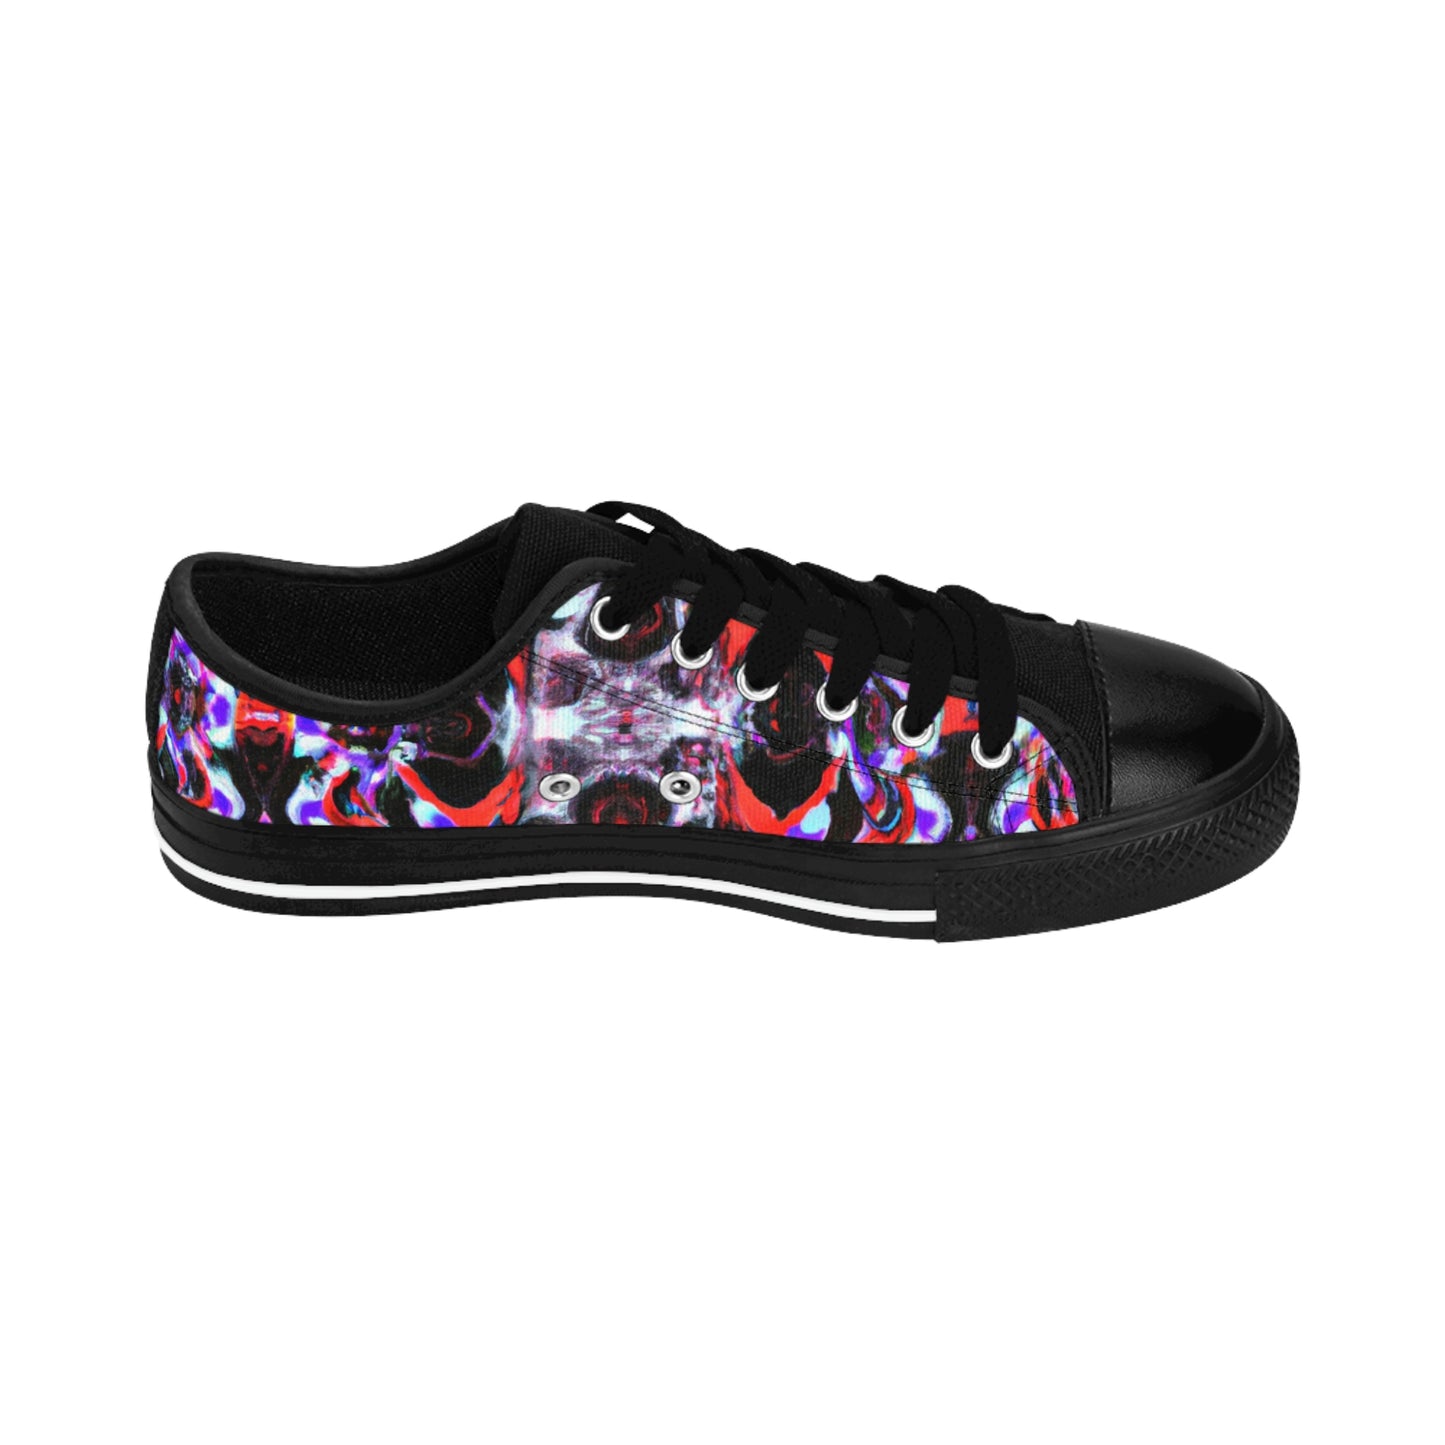 .

Oswin the Shoe Maker - Psychedelic Low Top